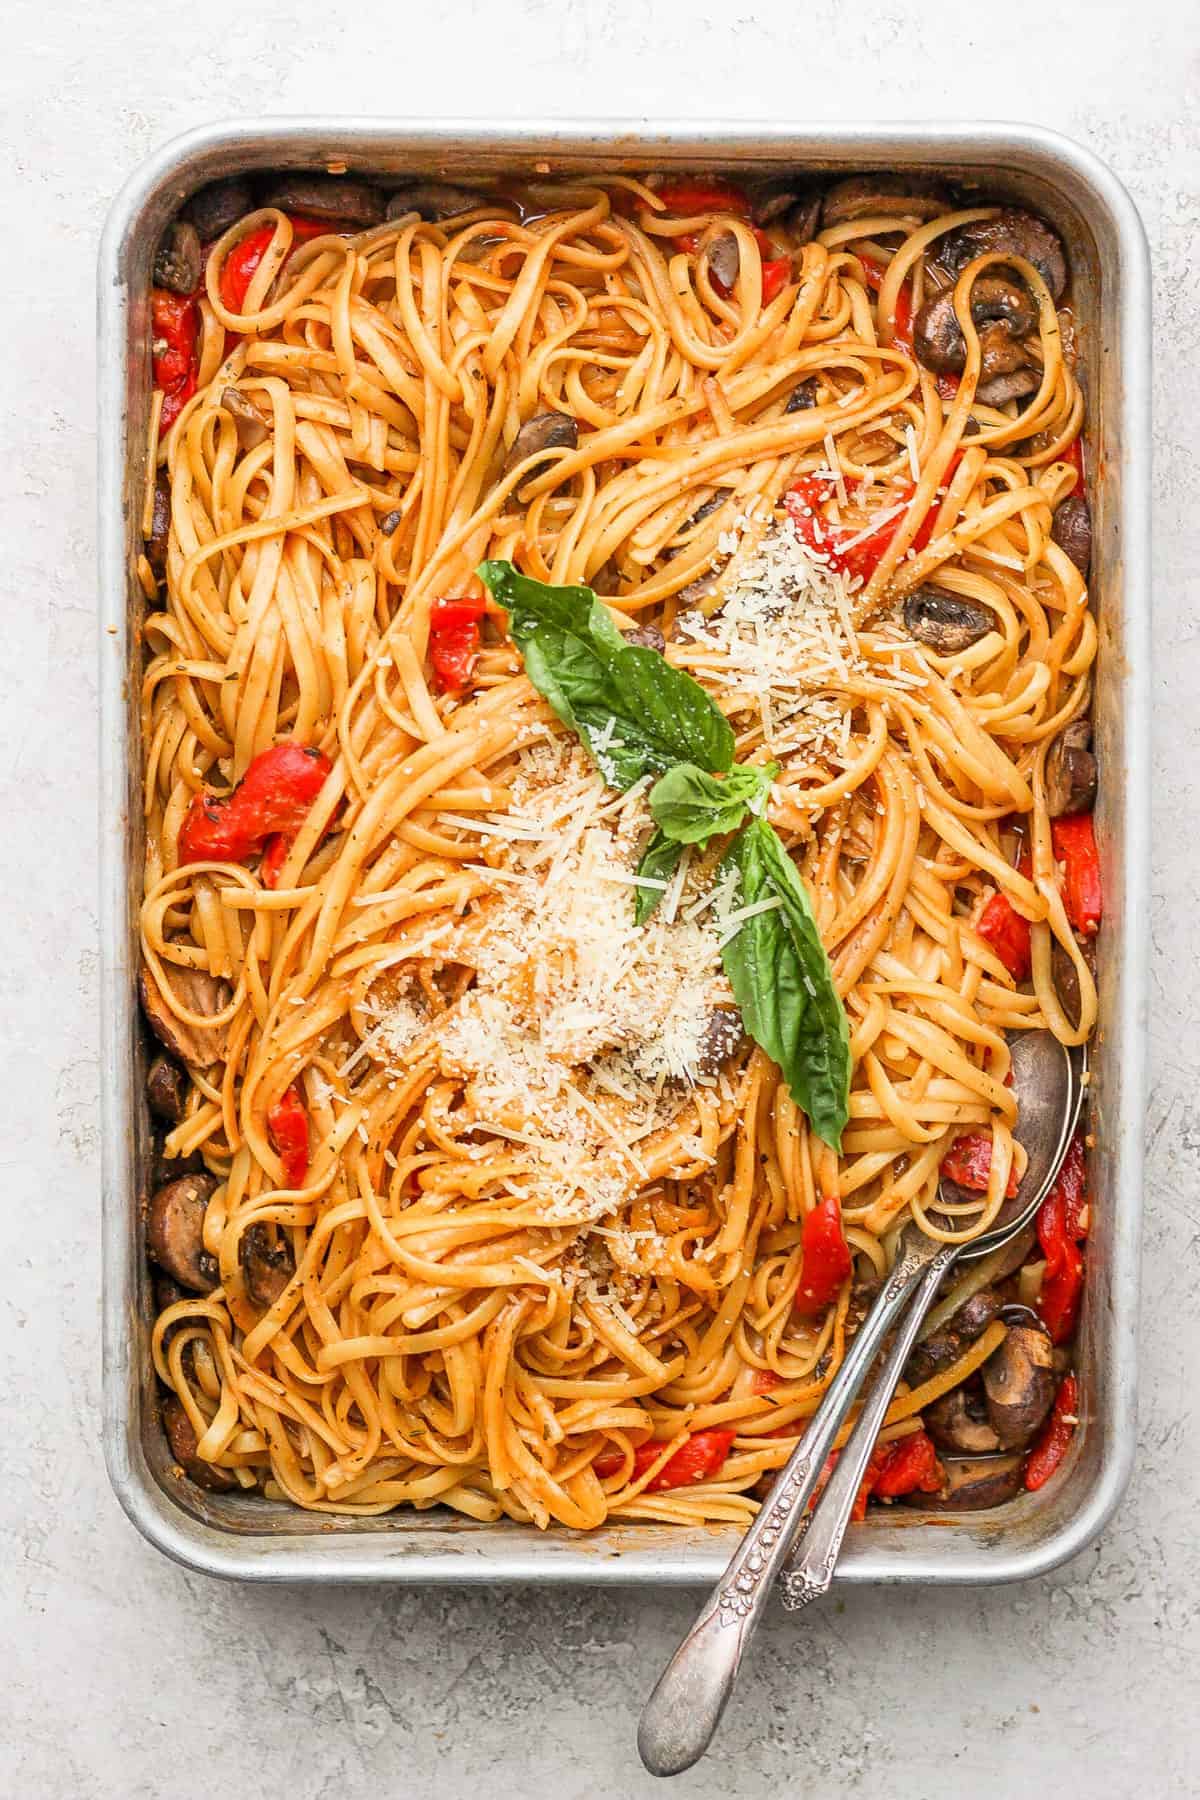 https://fitfoodiefinds.com/wp-content/uploads/2021/08/dump-pasta-11-scaled.jpg